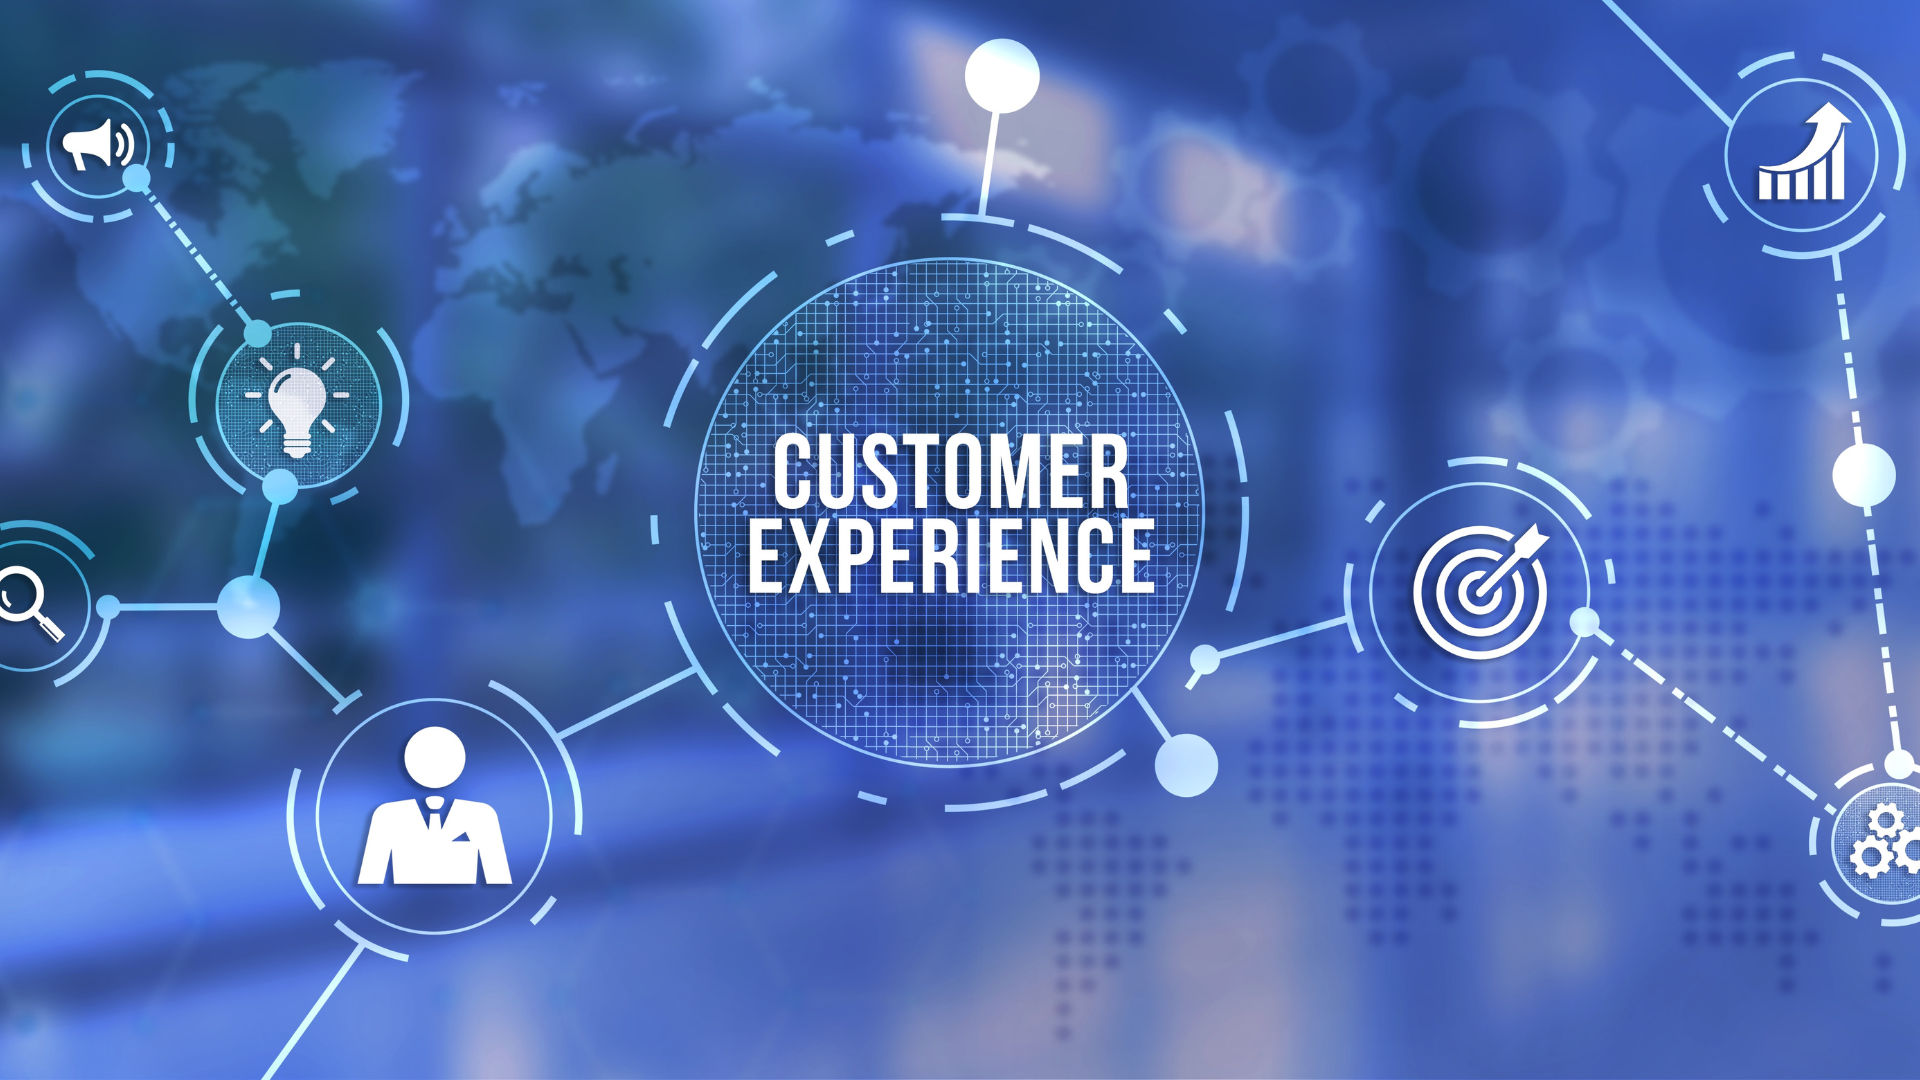 Effective Customer Experience Design: There Is No Endpoint